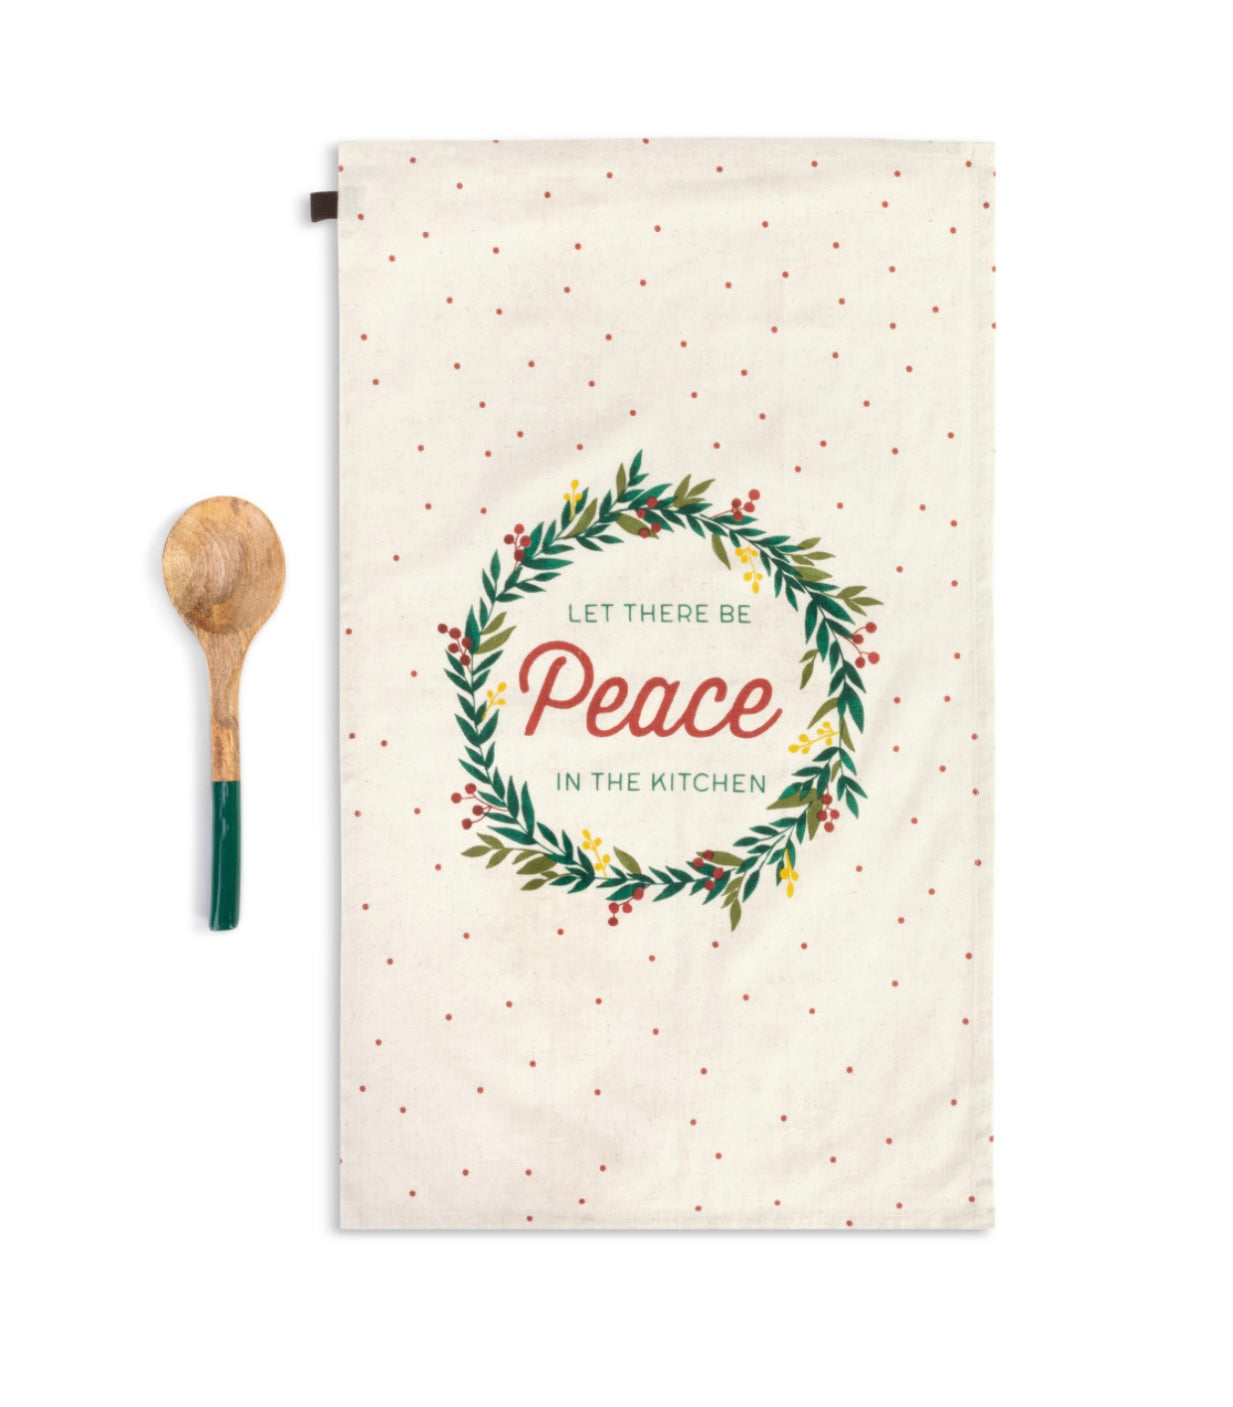 Let There Be Peace Kitchen Towel & Utensil Set